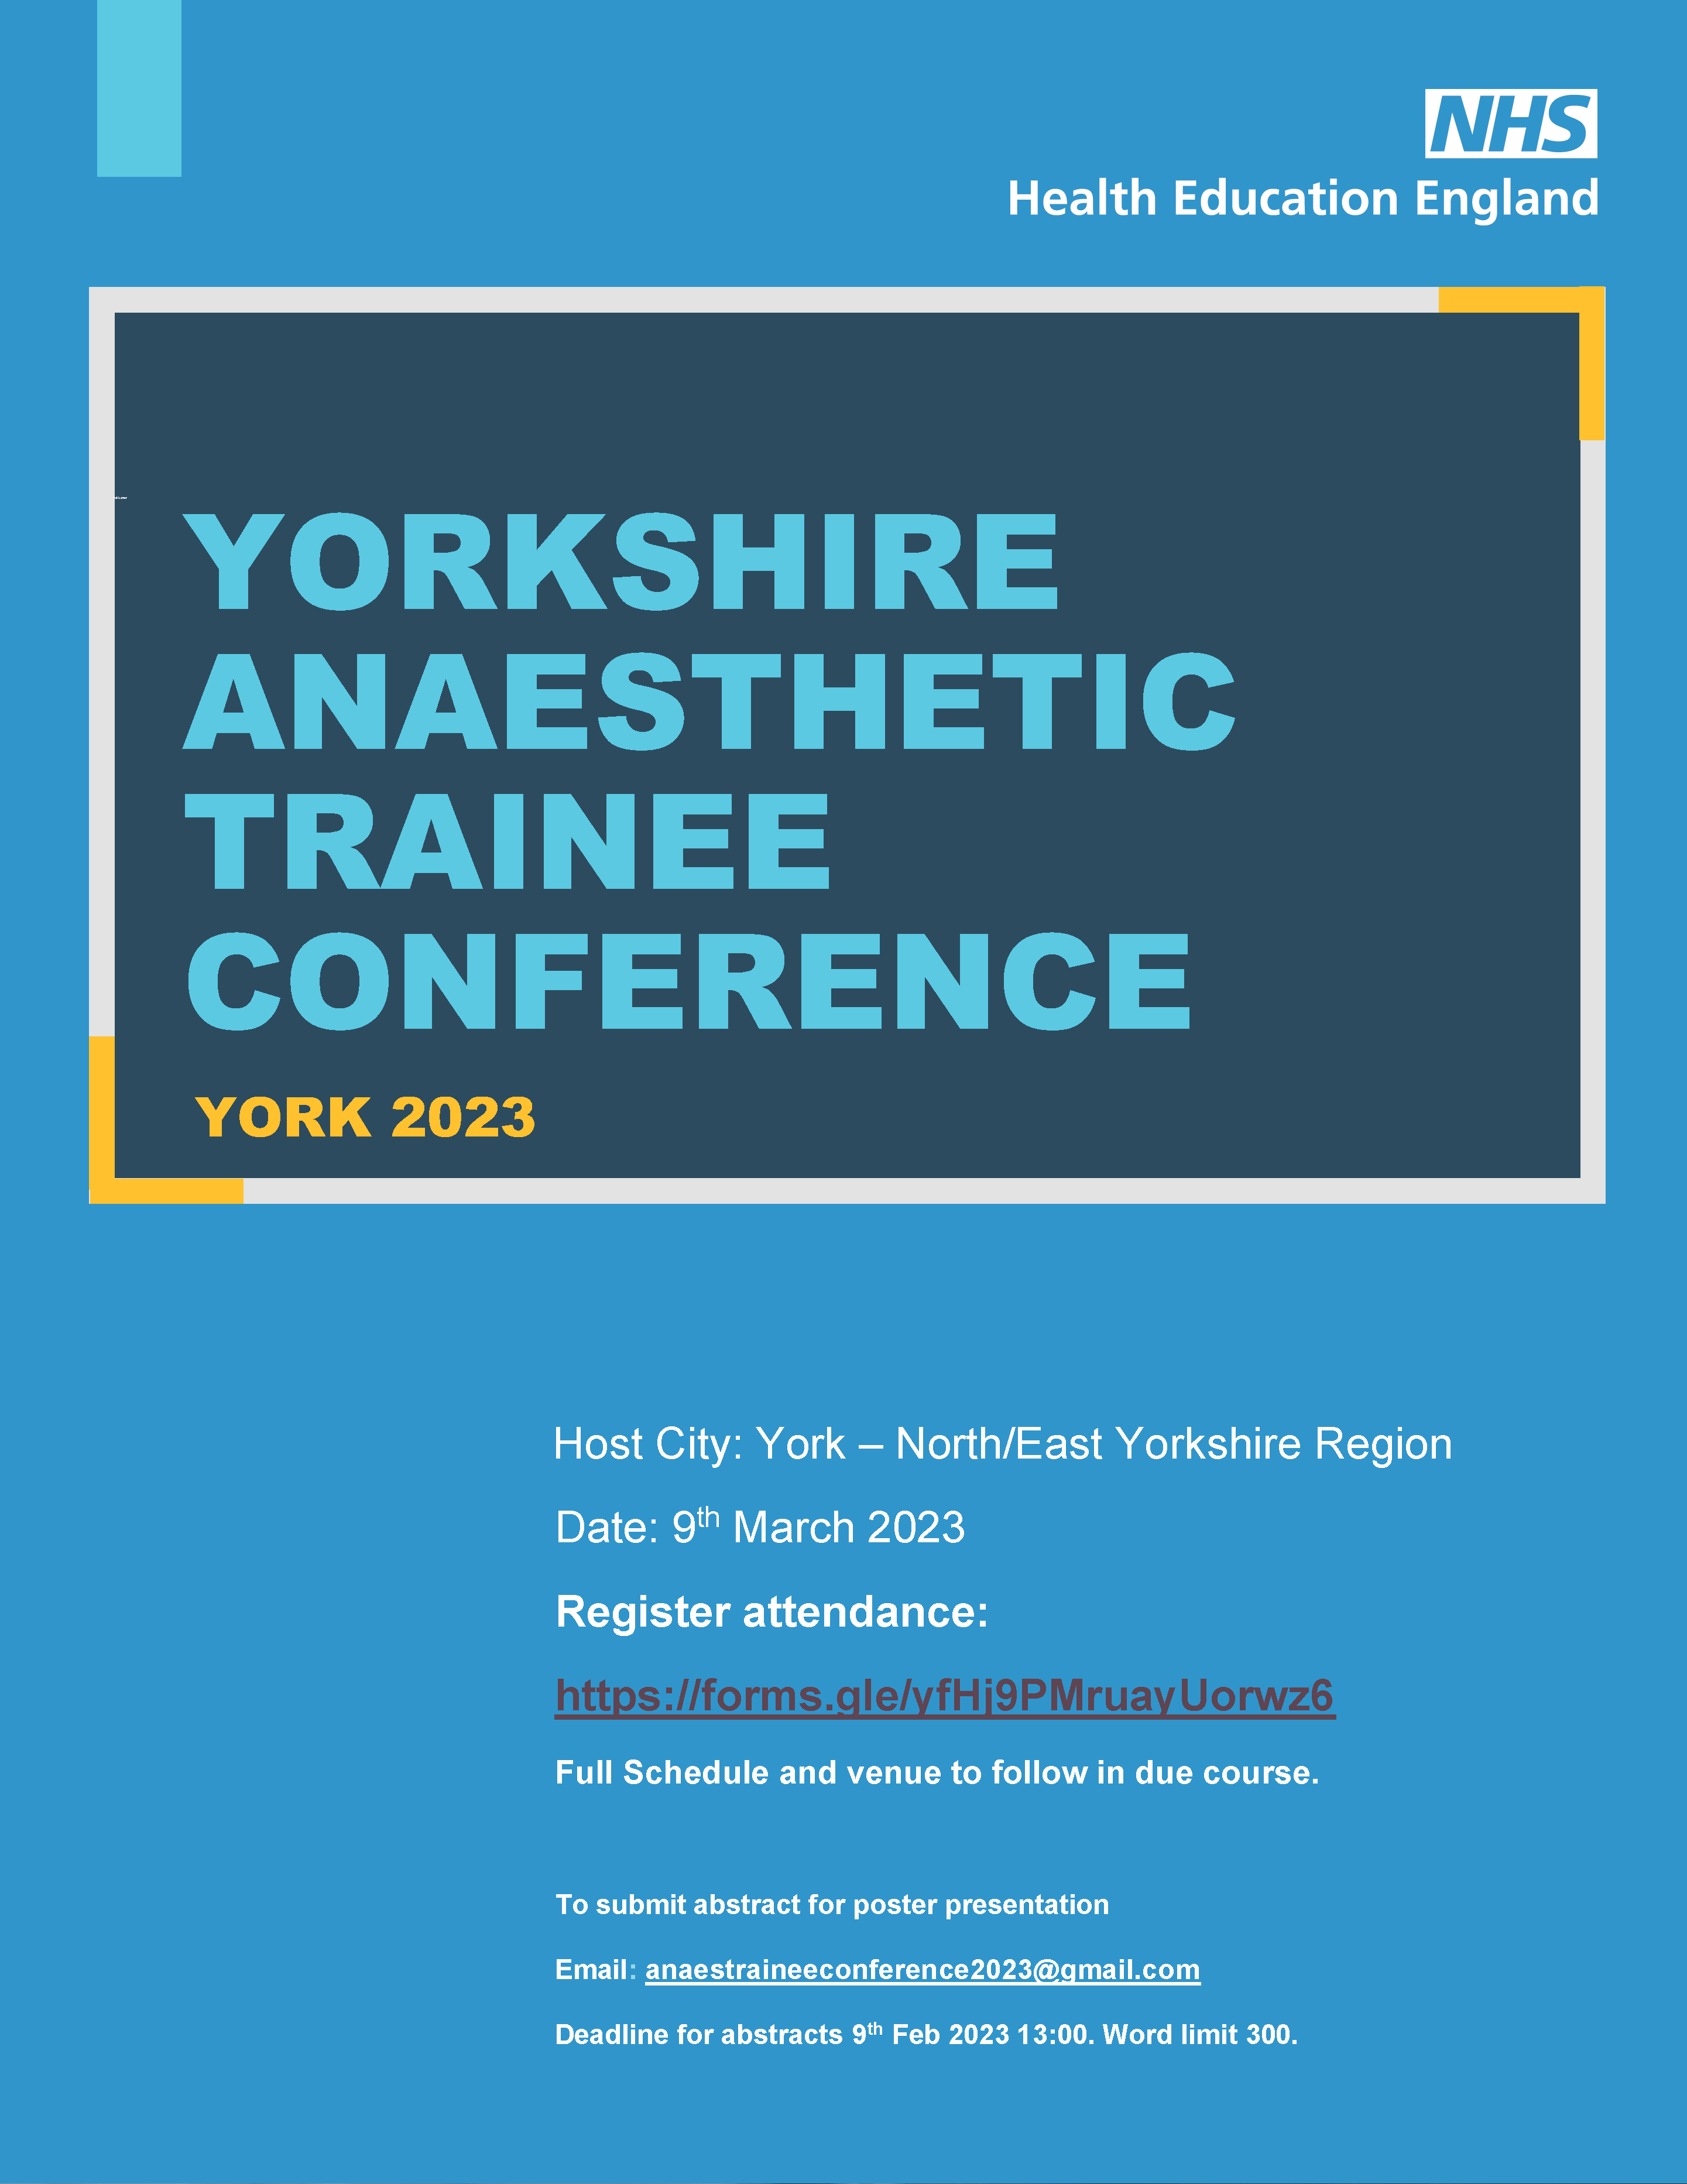 yat_conference_advert_23.png